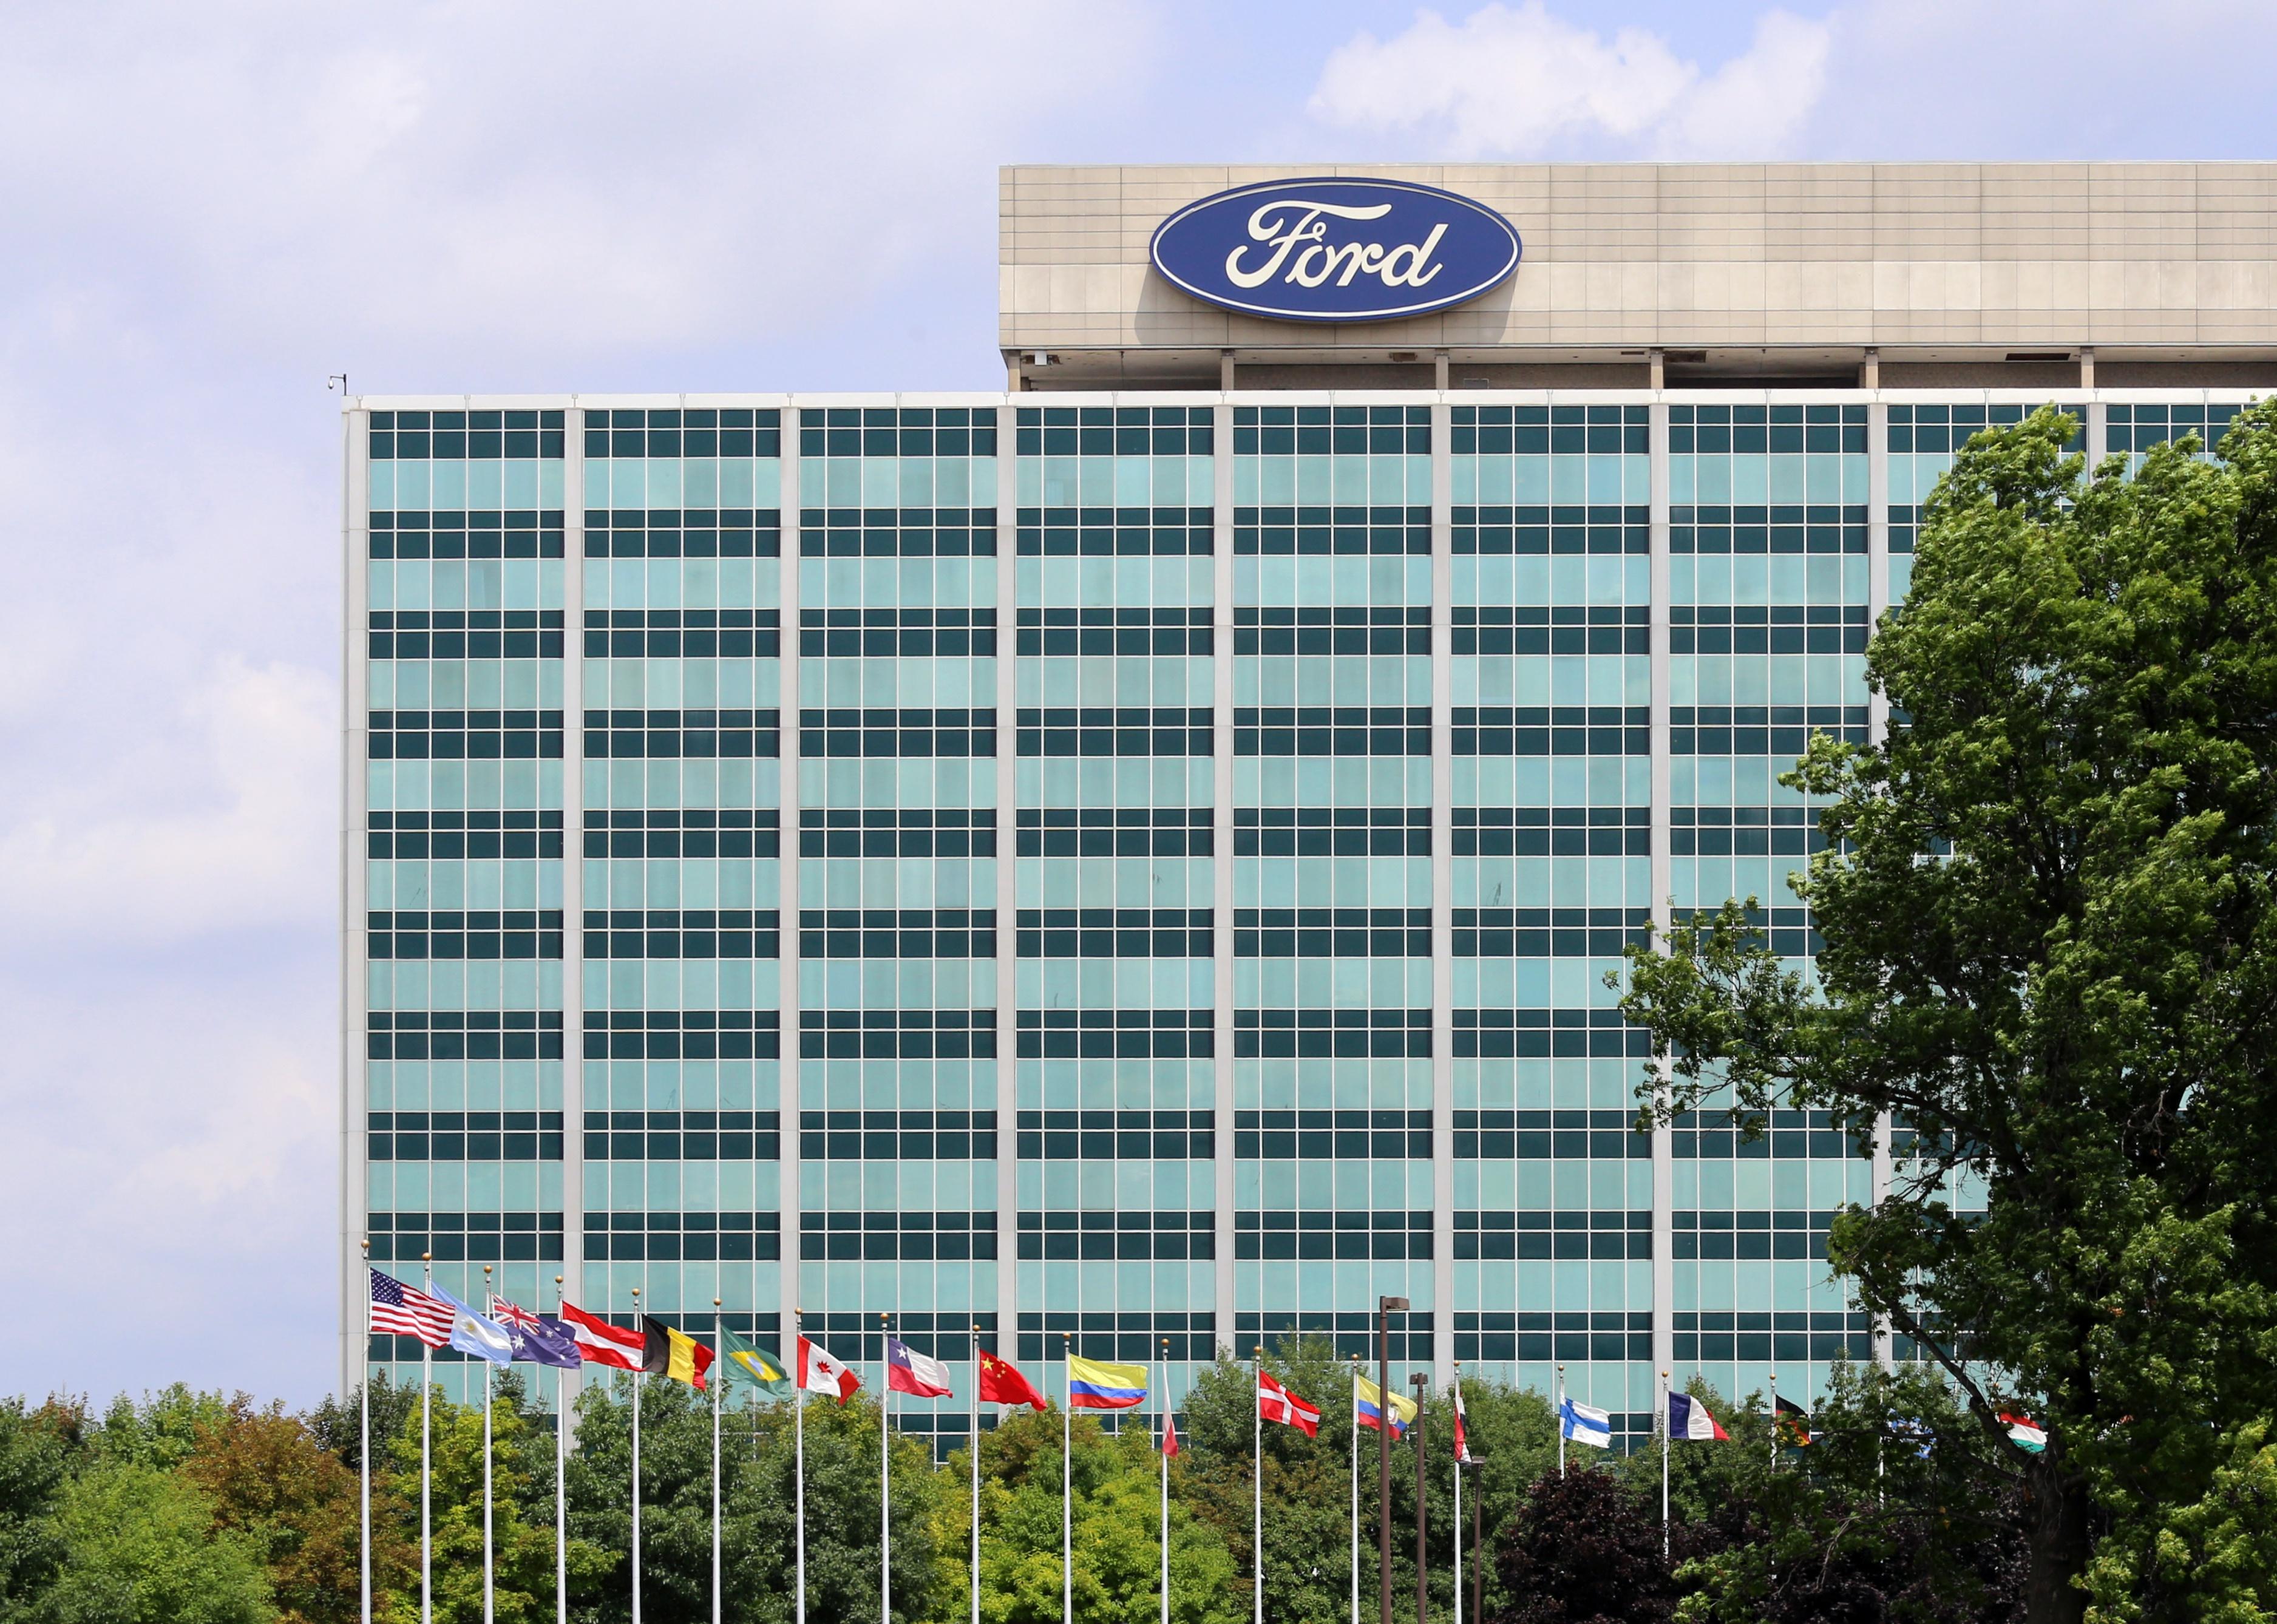 The Ford Motor Company World Headquarters building located in Dearborn.